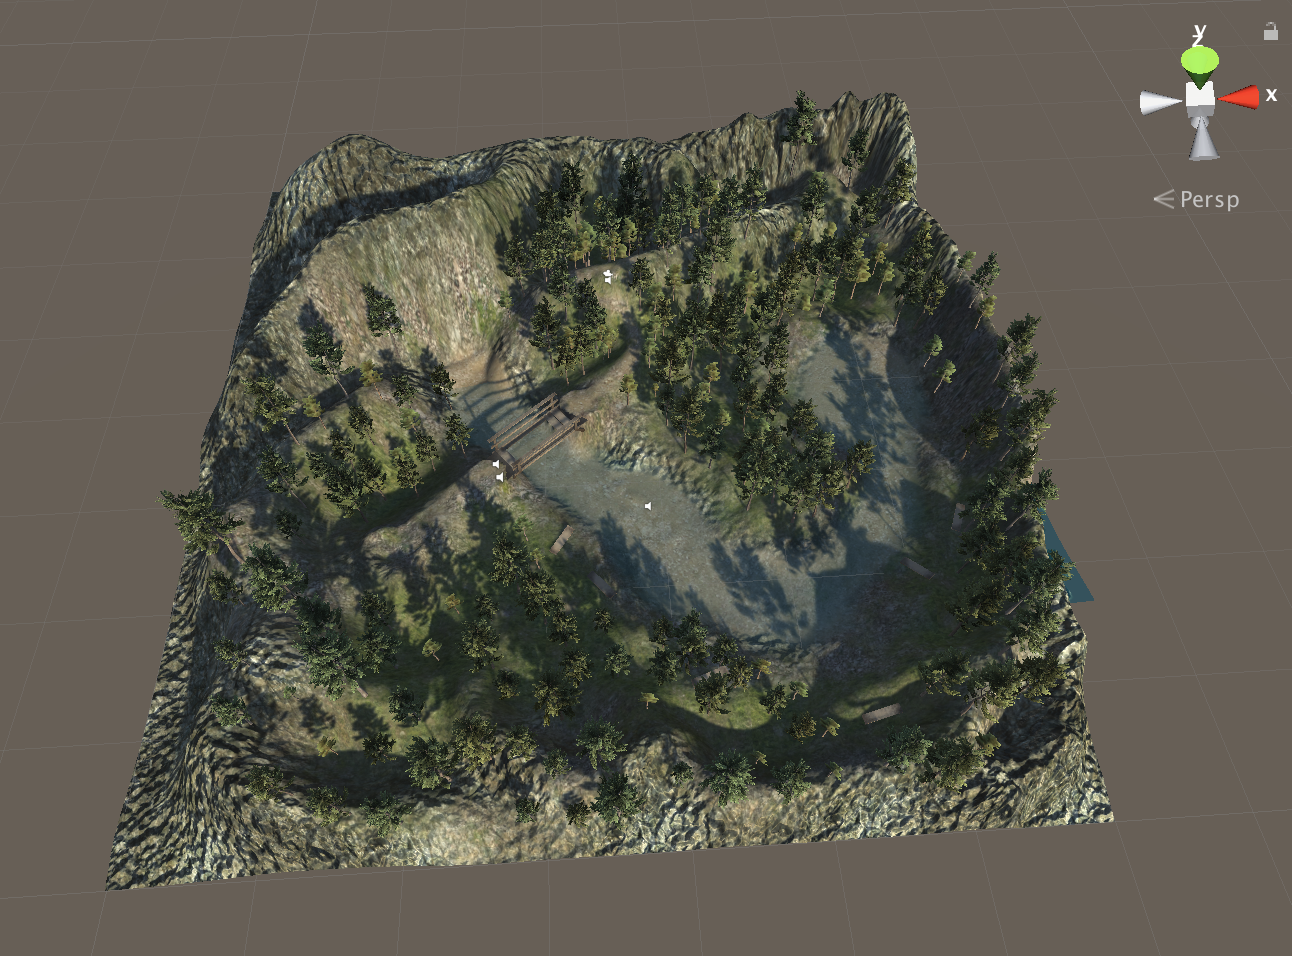  Overview of the whole level and terrain. Screenshot taken from the Unity Editor viewport.&nbsp; 